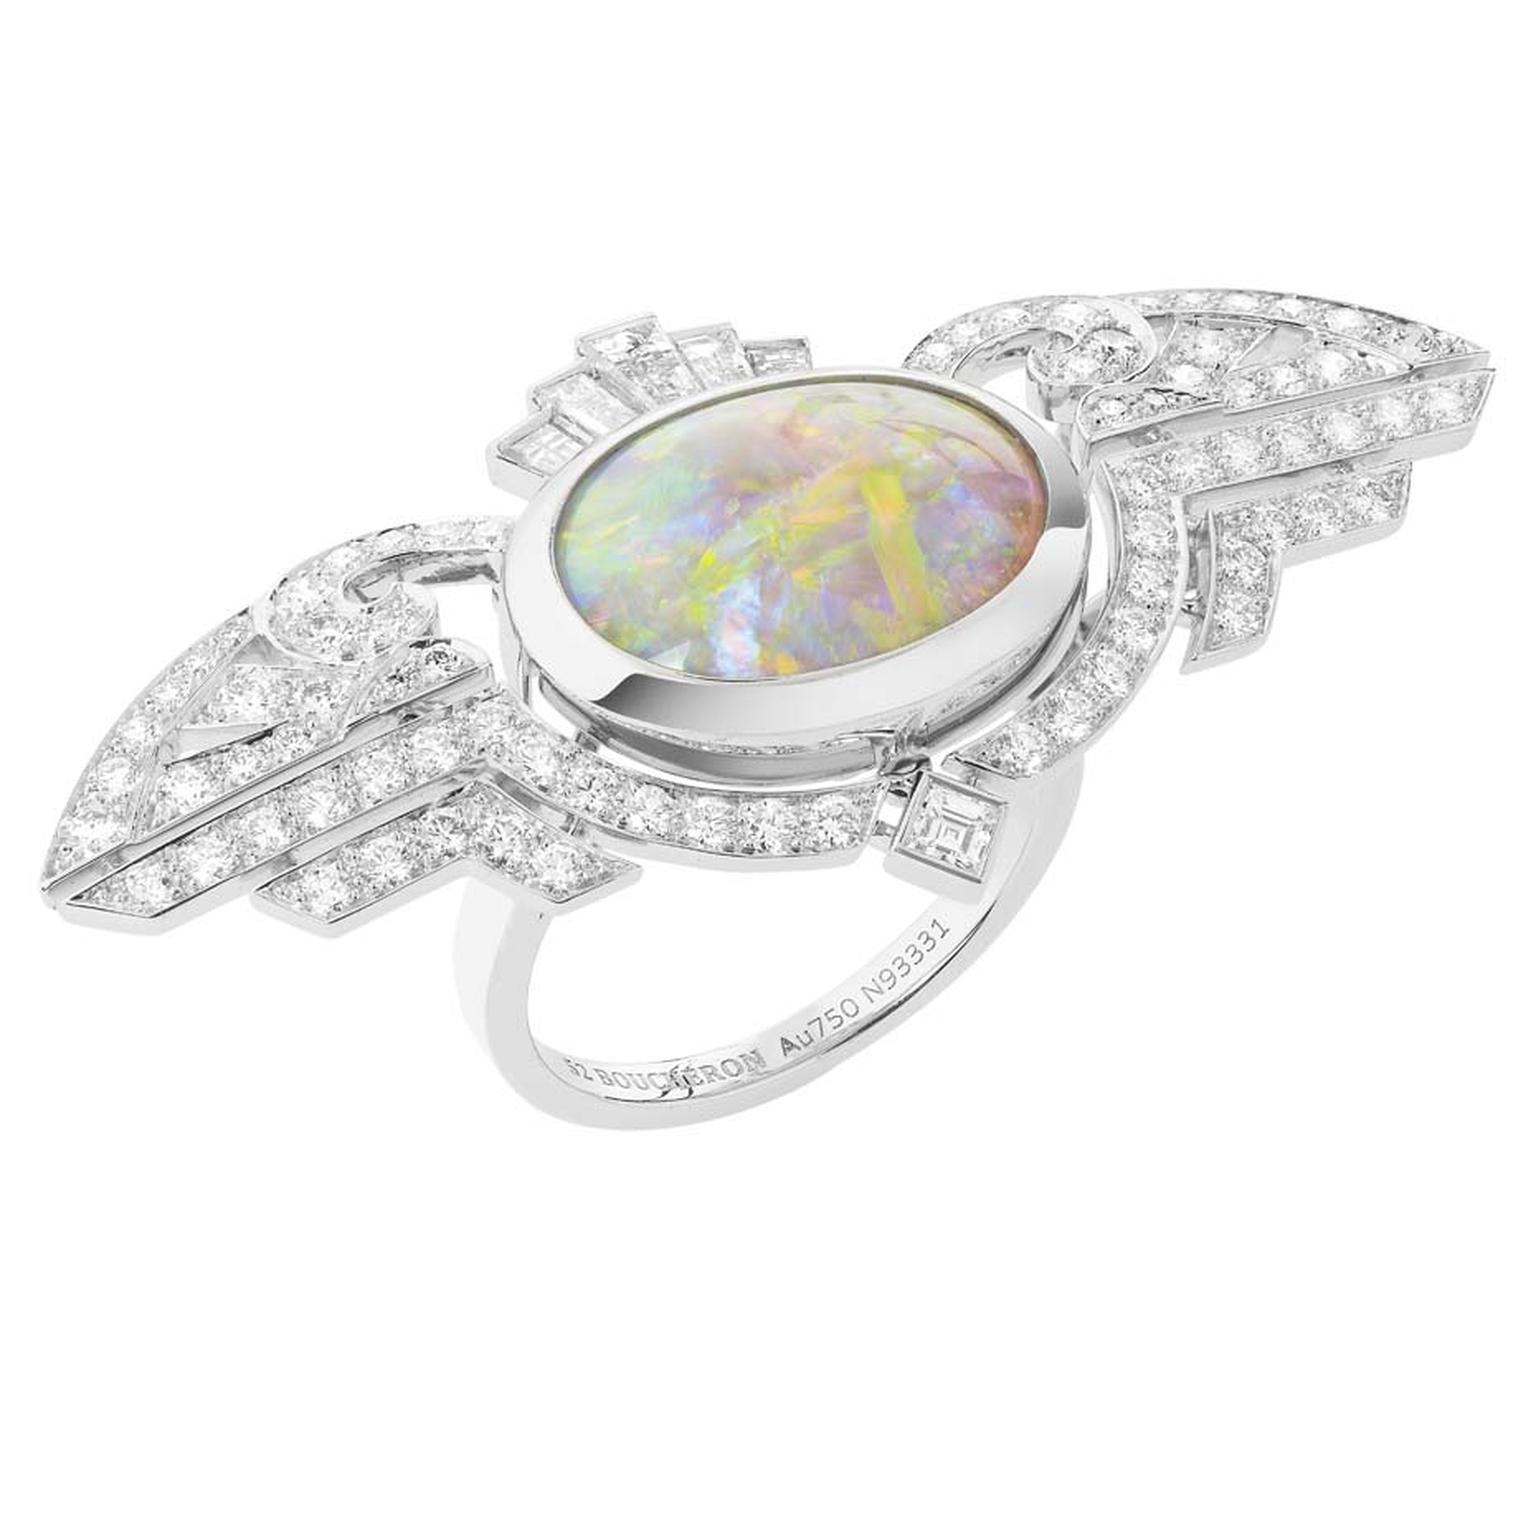 Boucheron Indian Palace opal and diamond ring, inspired by the coloured pools of water found within Indian Palaces.